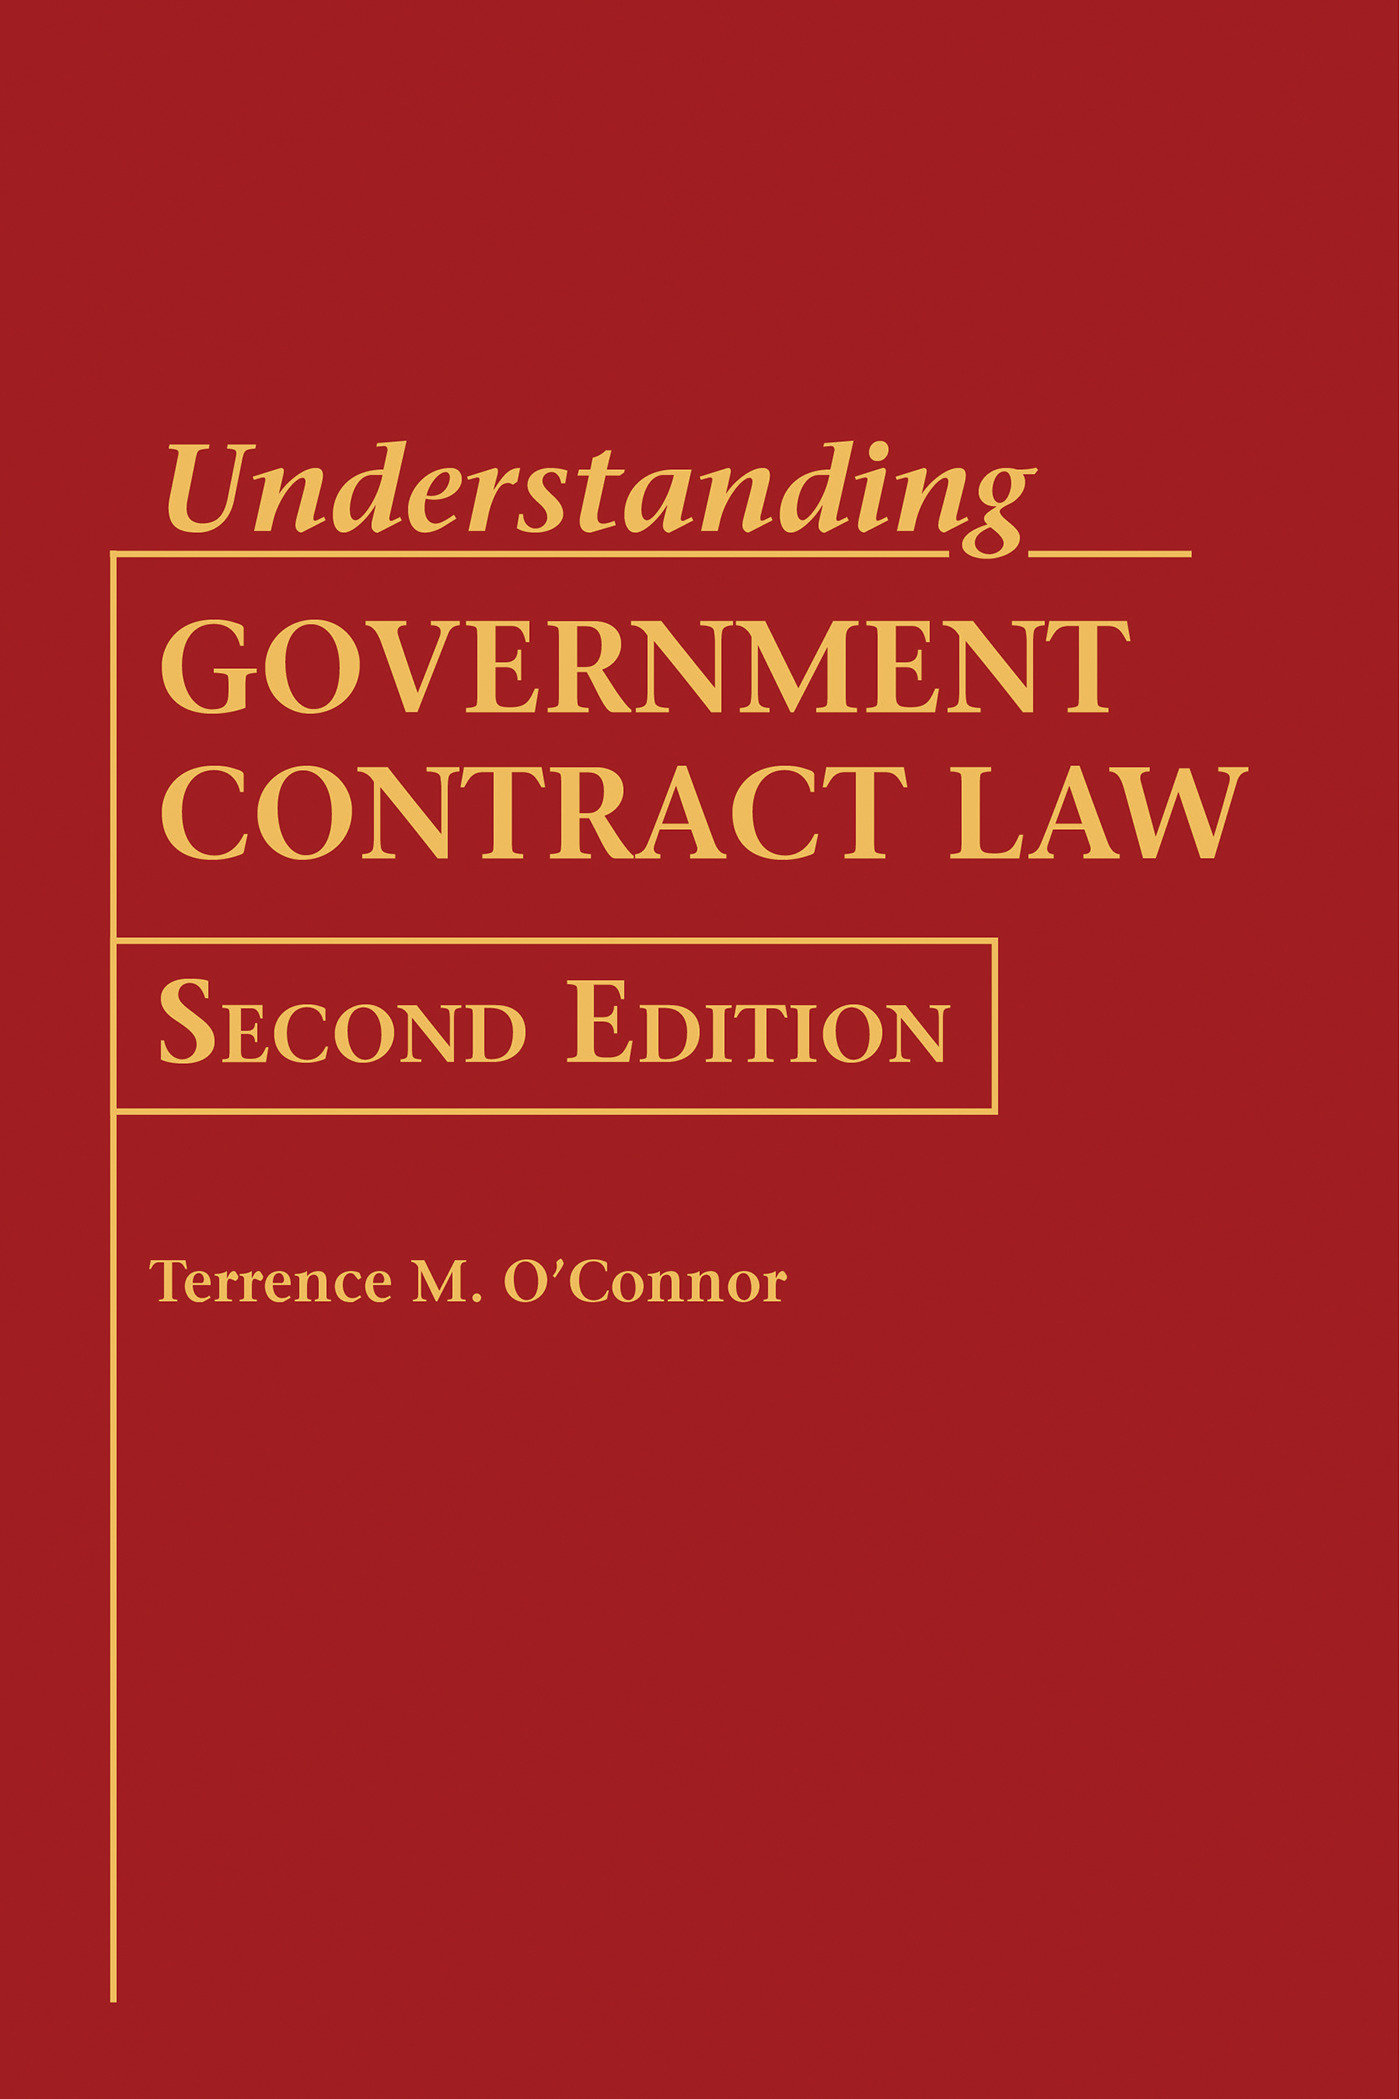 Understanding Government Contract Law (Hardcover Book)